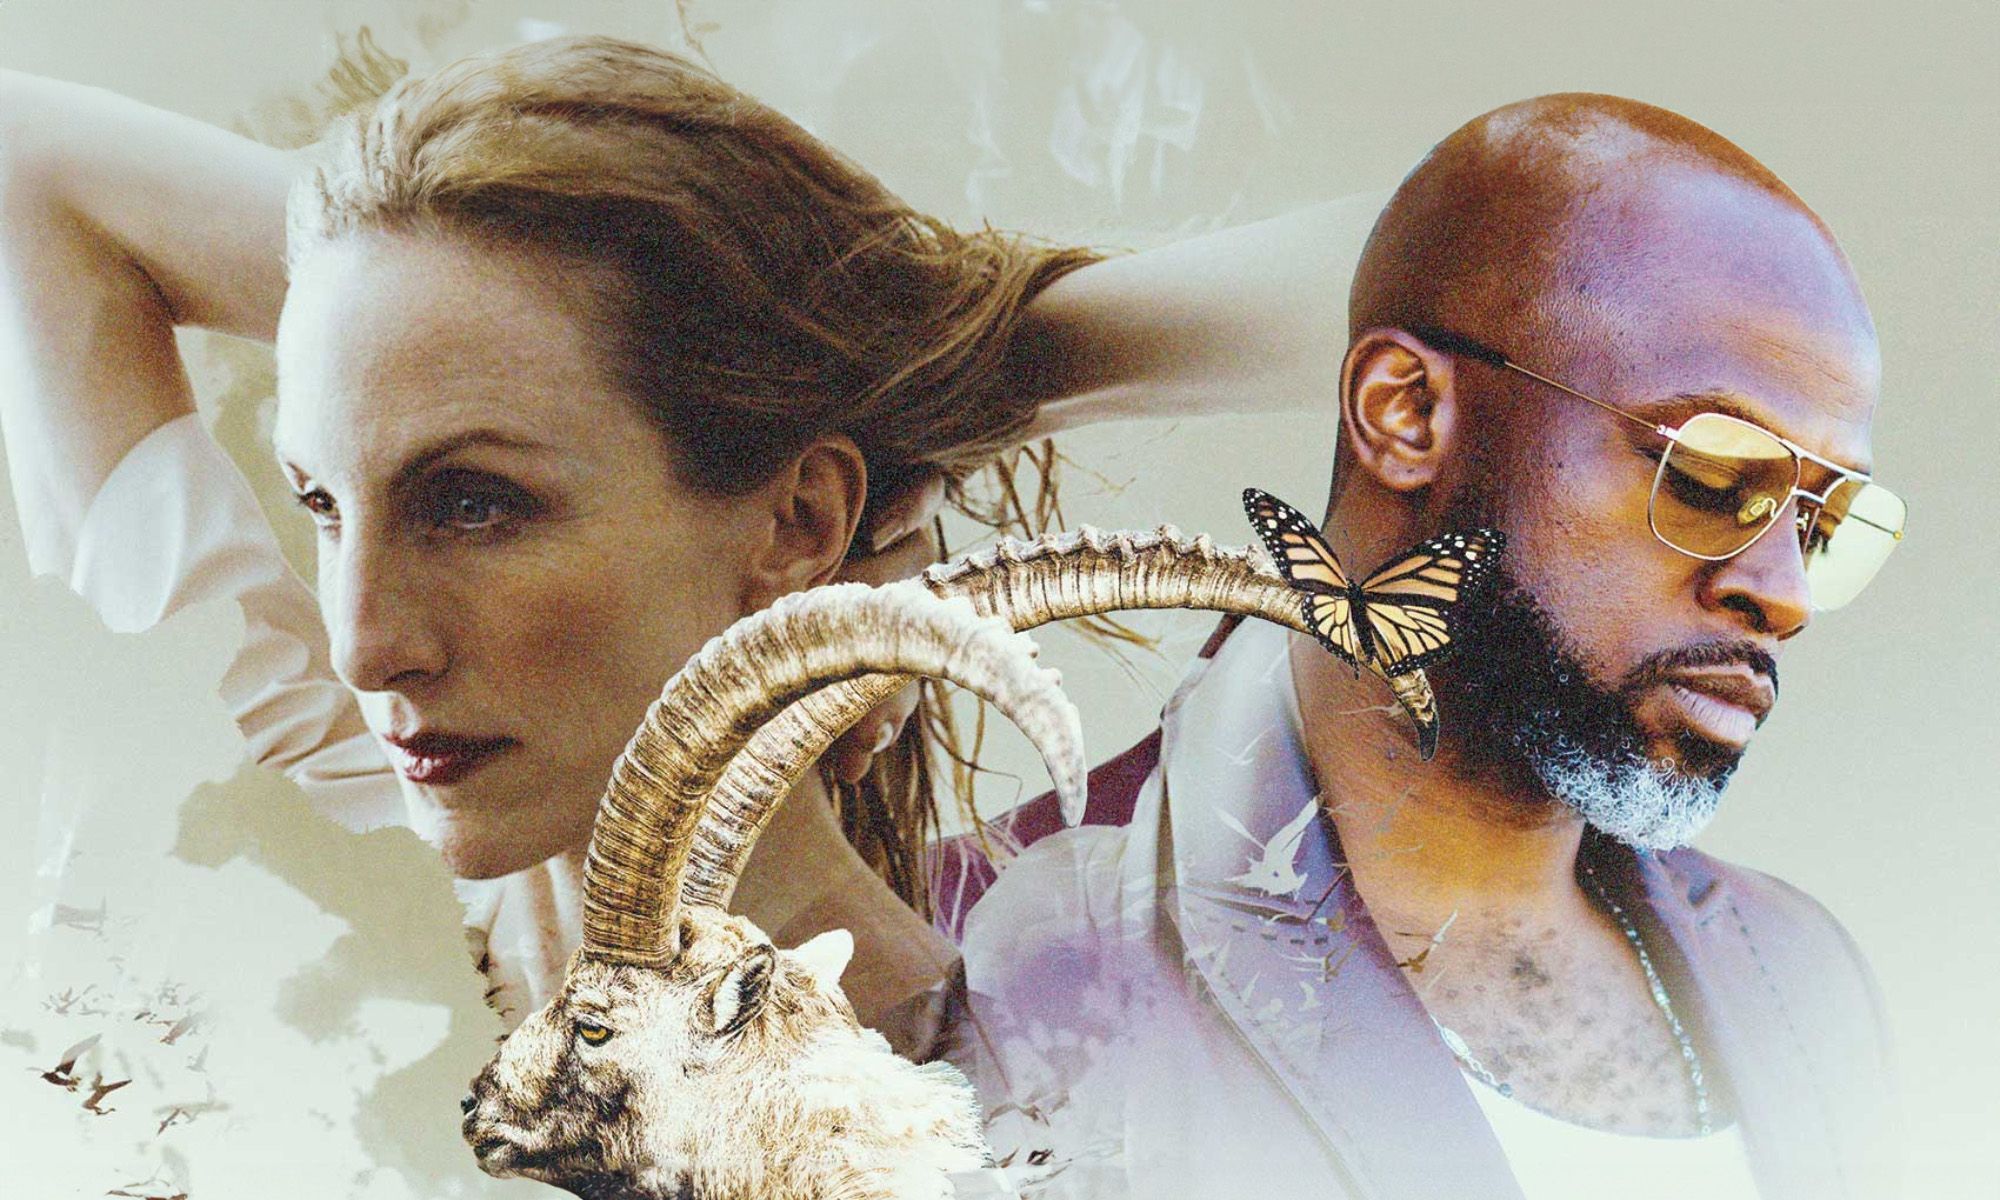 Wendy Whelan (on the left) and Marc Bamuthi Joseph (on the right) with illustrations of sheep, butterflies, and clouds throughout.